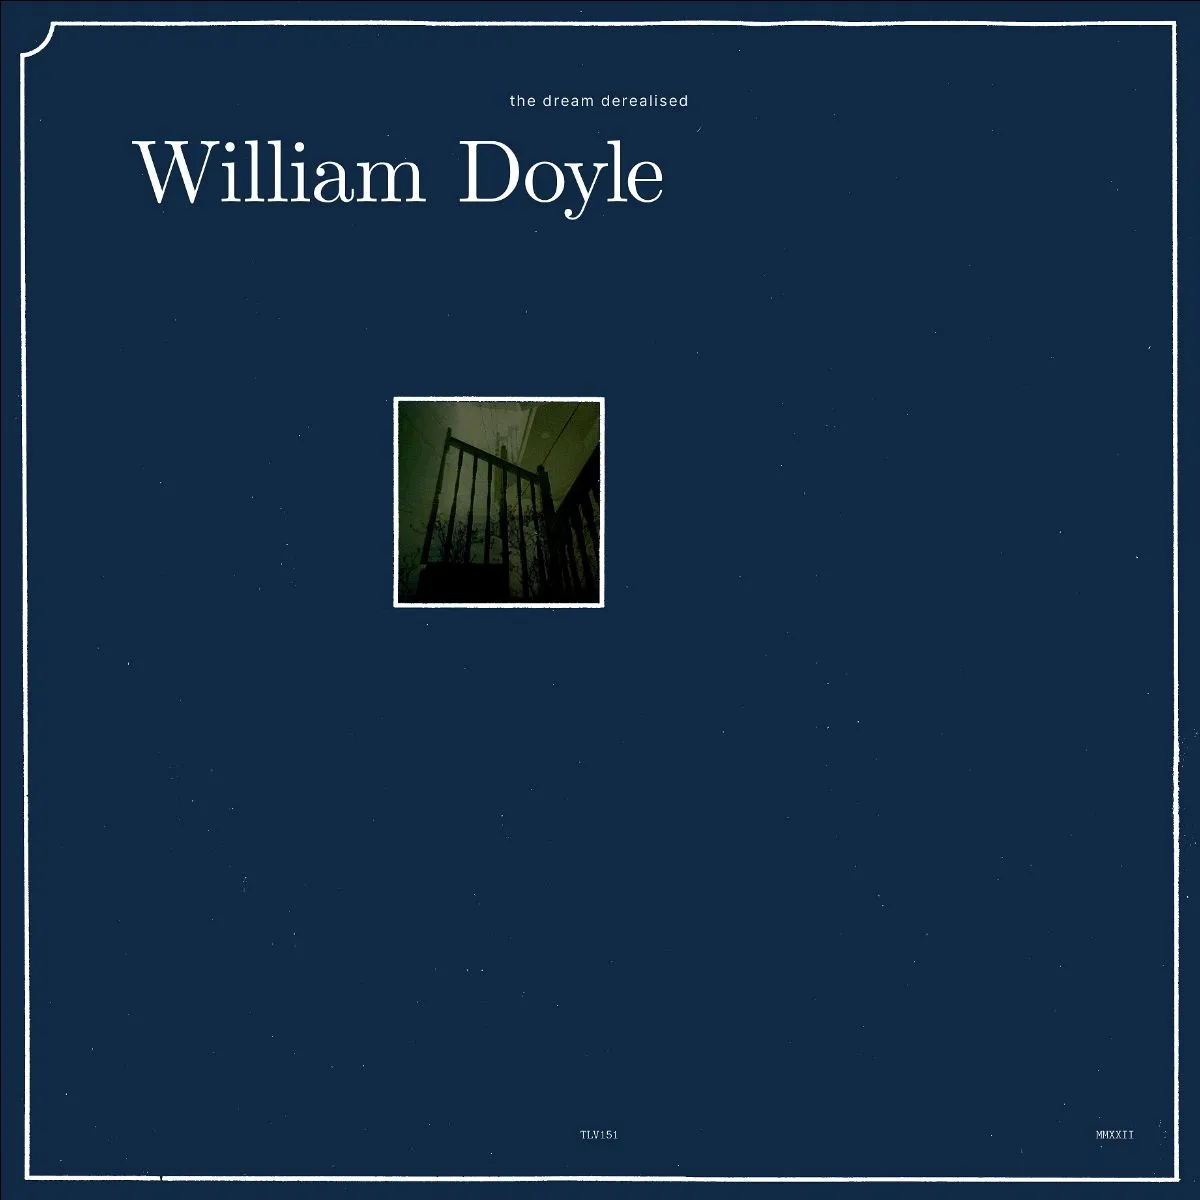 <strong>William Doyle - The Dream Derealised</strong> (Vinyl LP - black)